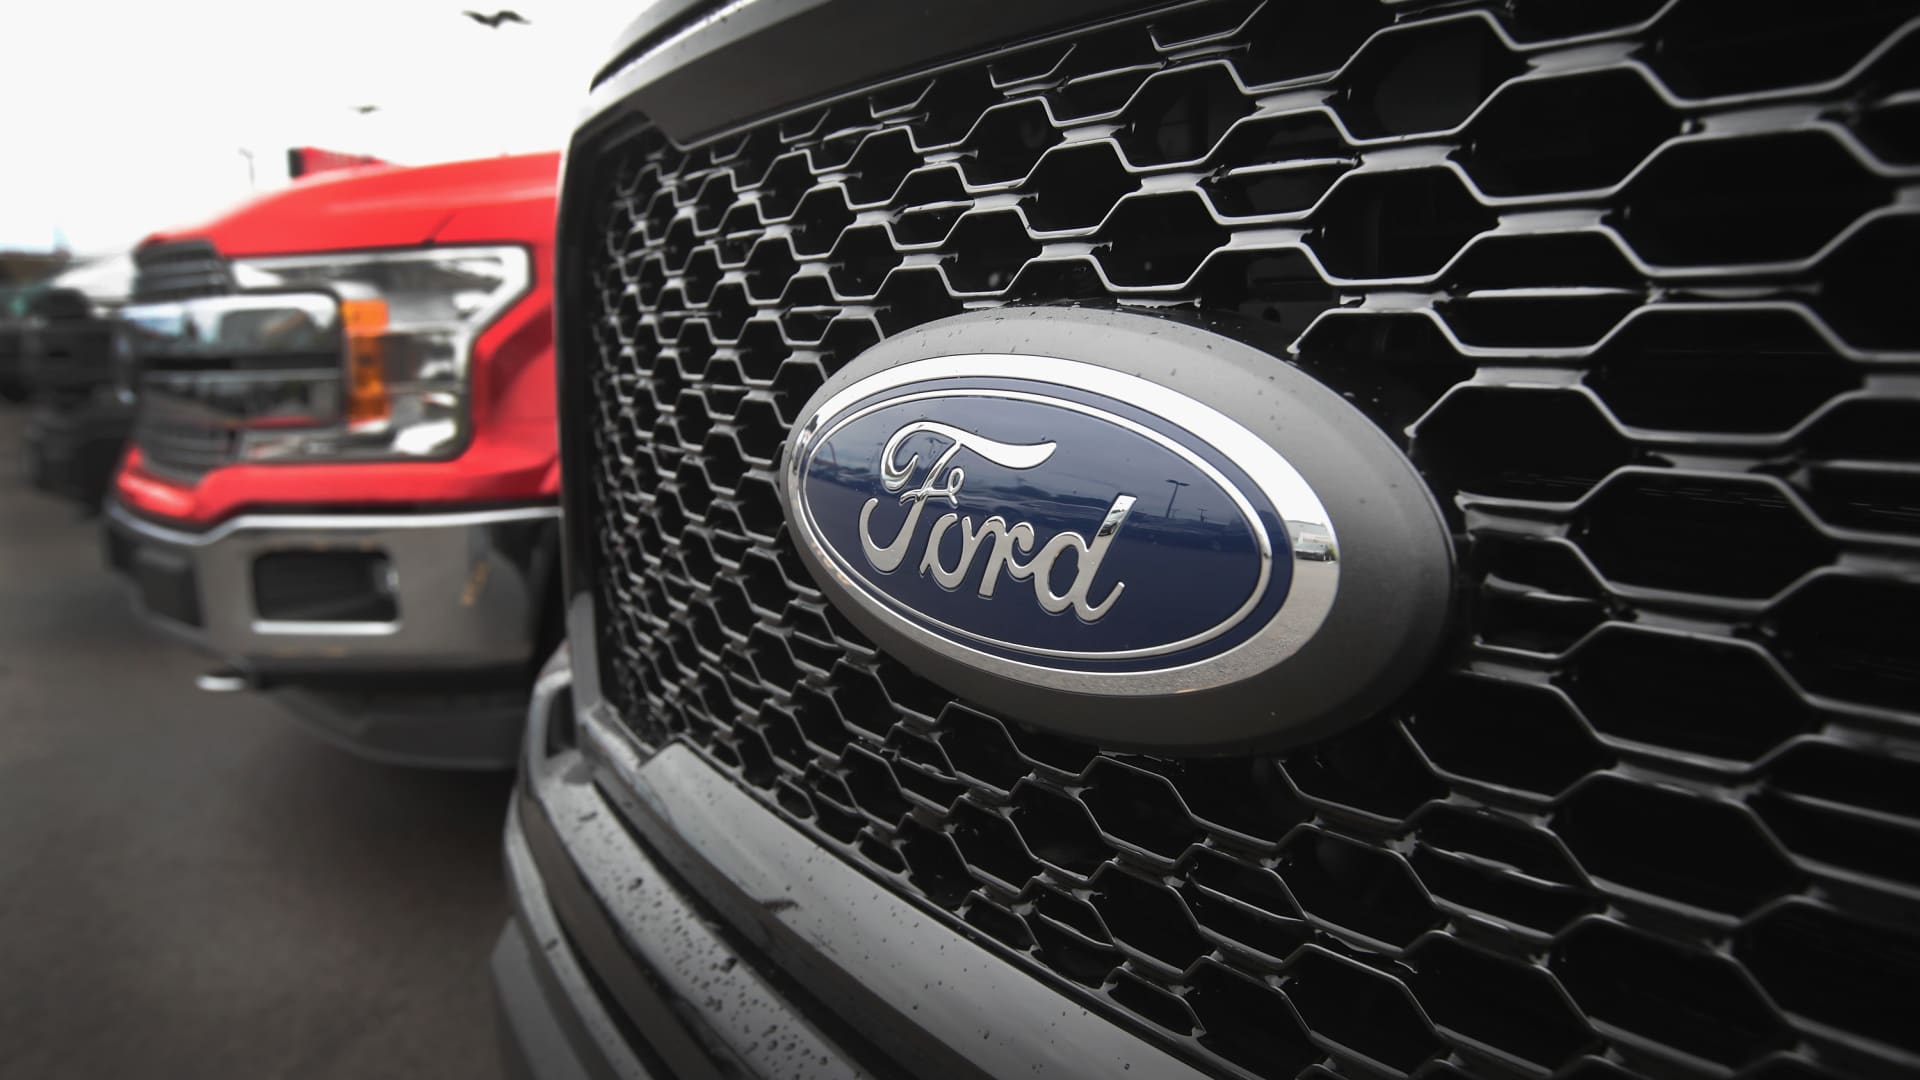 Ford’s supply chain problems include blue oval badges for F-Series pickups